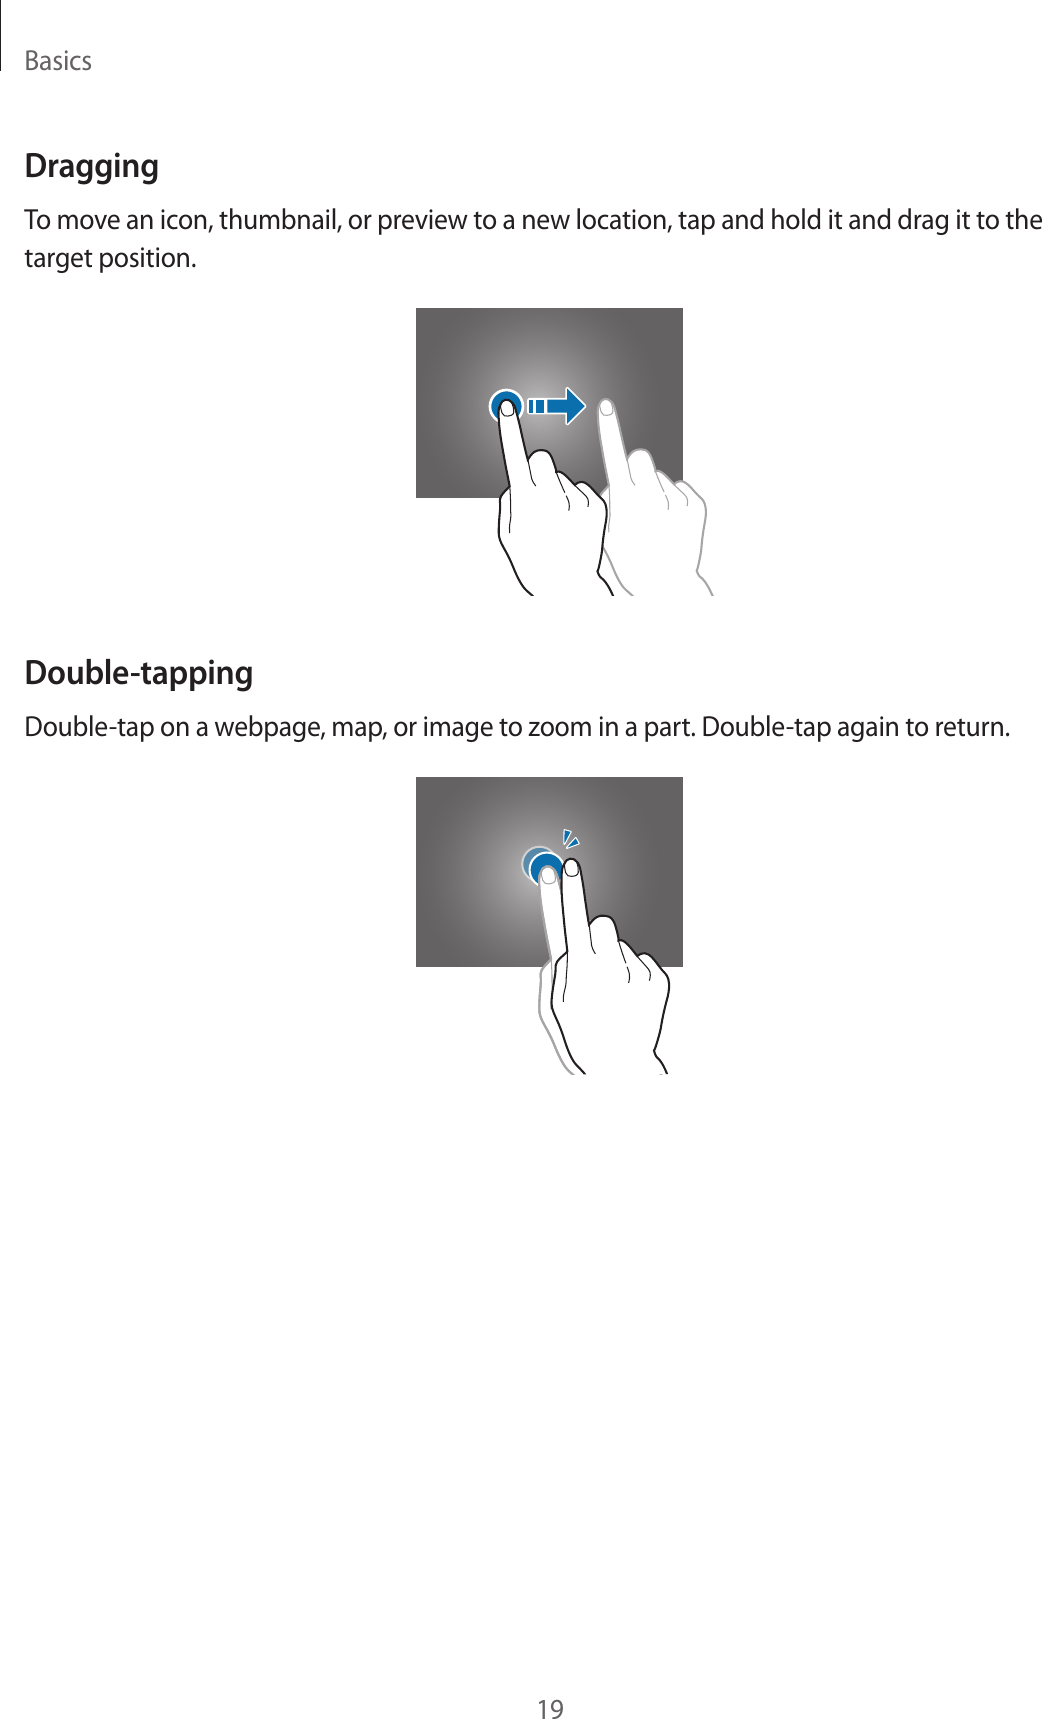 Basics19DraggingTo move an icon, thumbnail, or preview to a new location, tap and hold it and drag it to the target position.Double-tappingDouble-tap on a webpage, map, or image to zoom in a part. Double-tap again to return.